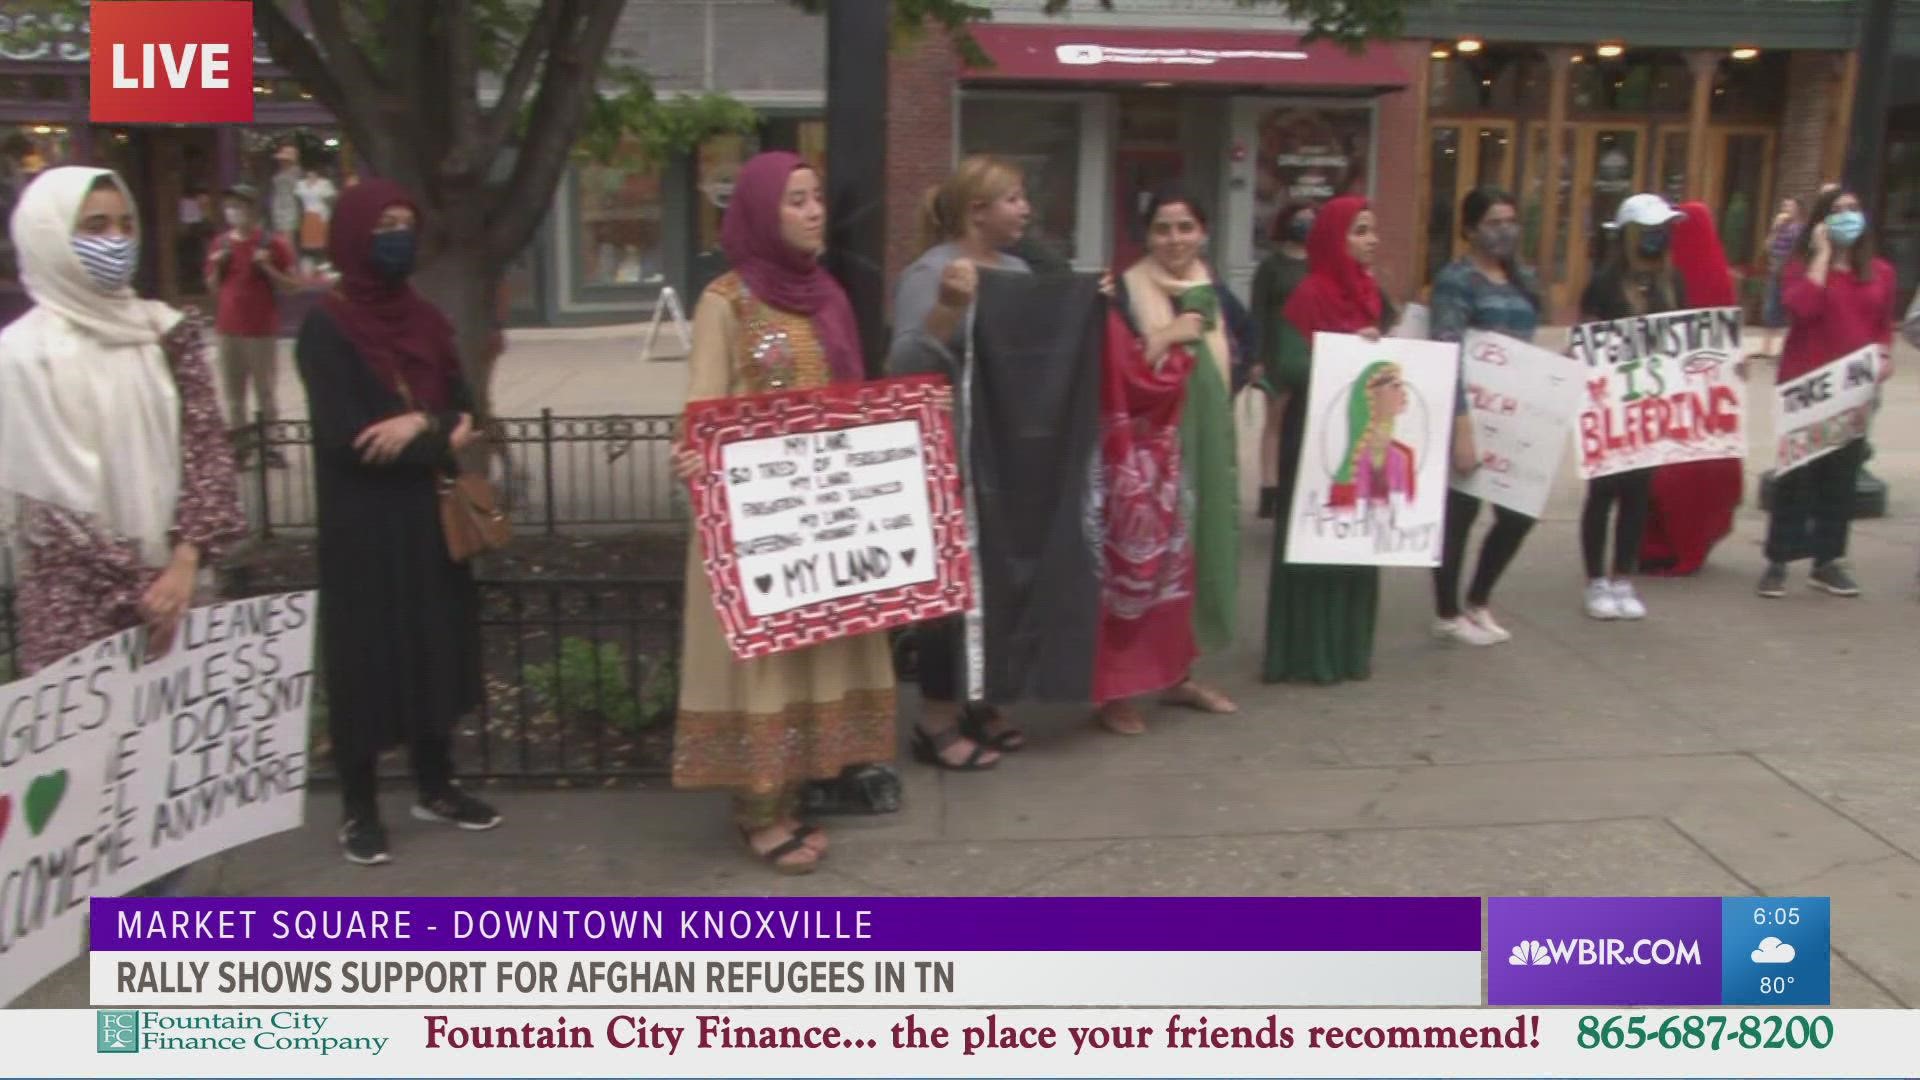 People gathered at Market Square to show their support for Afghan refugees coming to Tennessee.